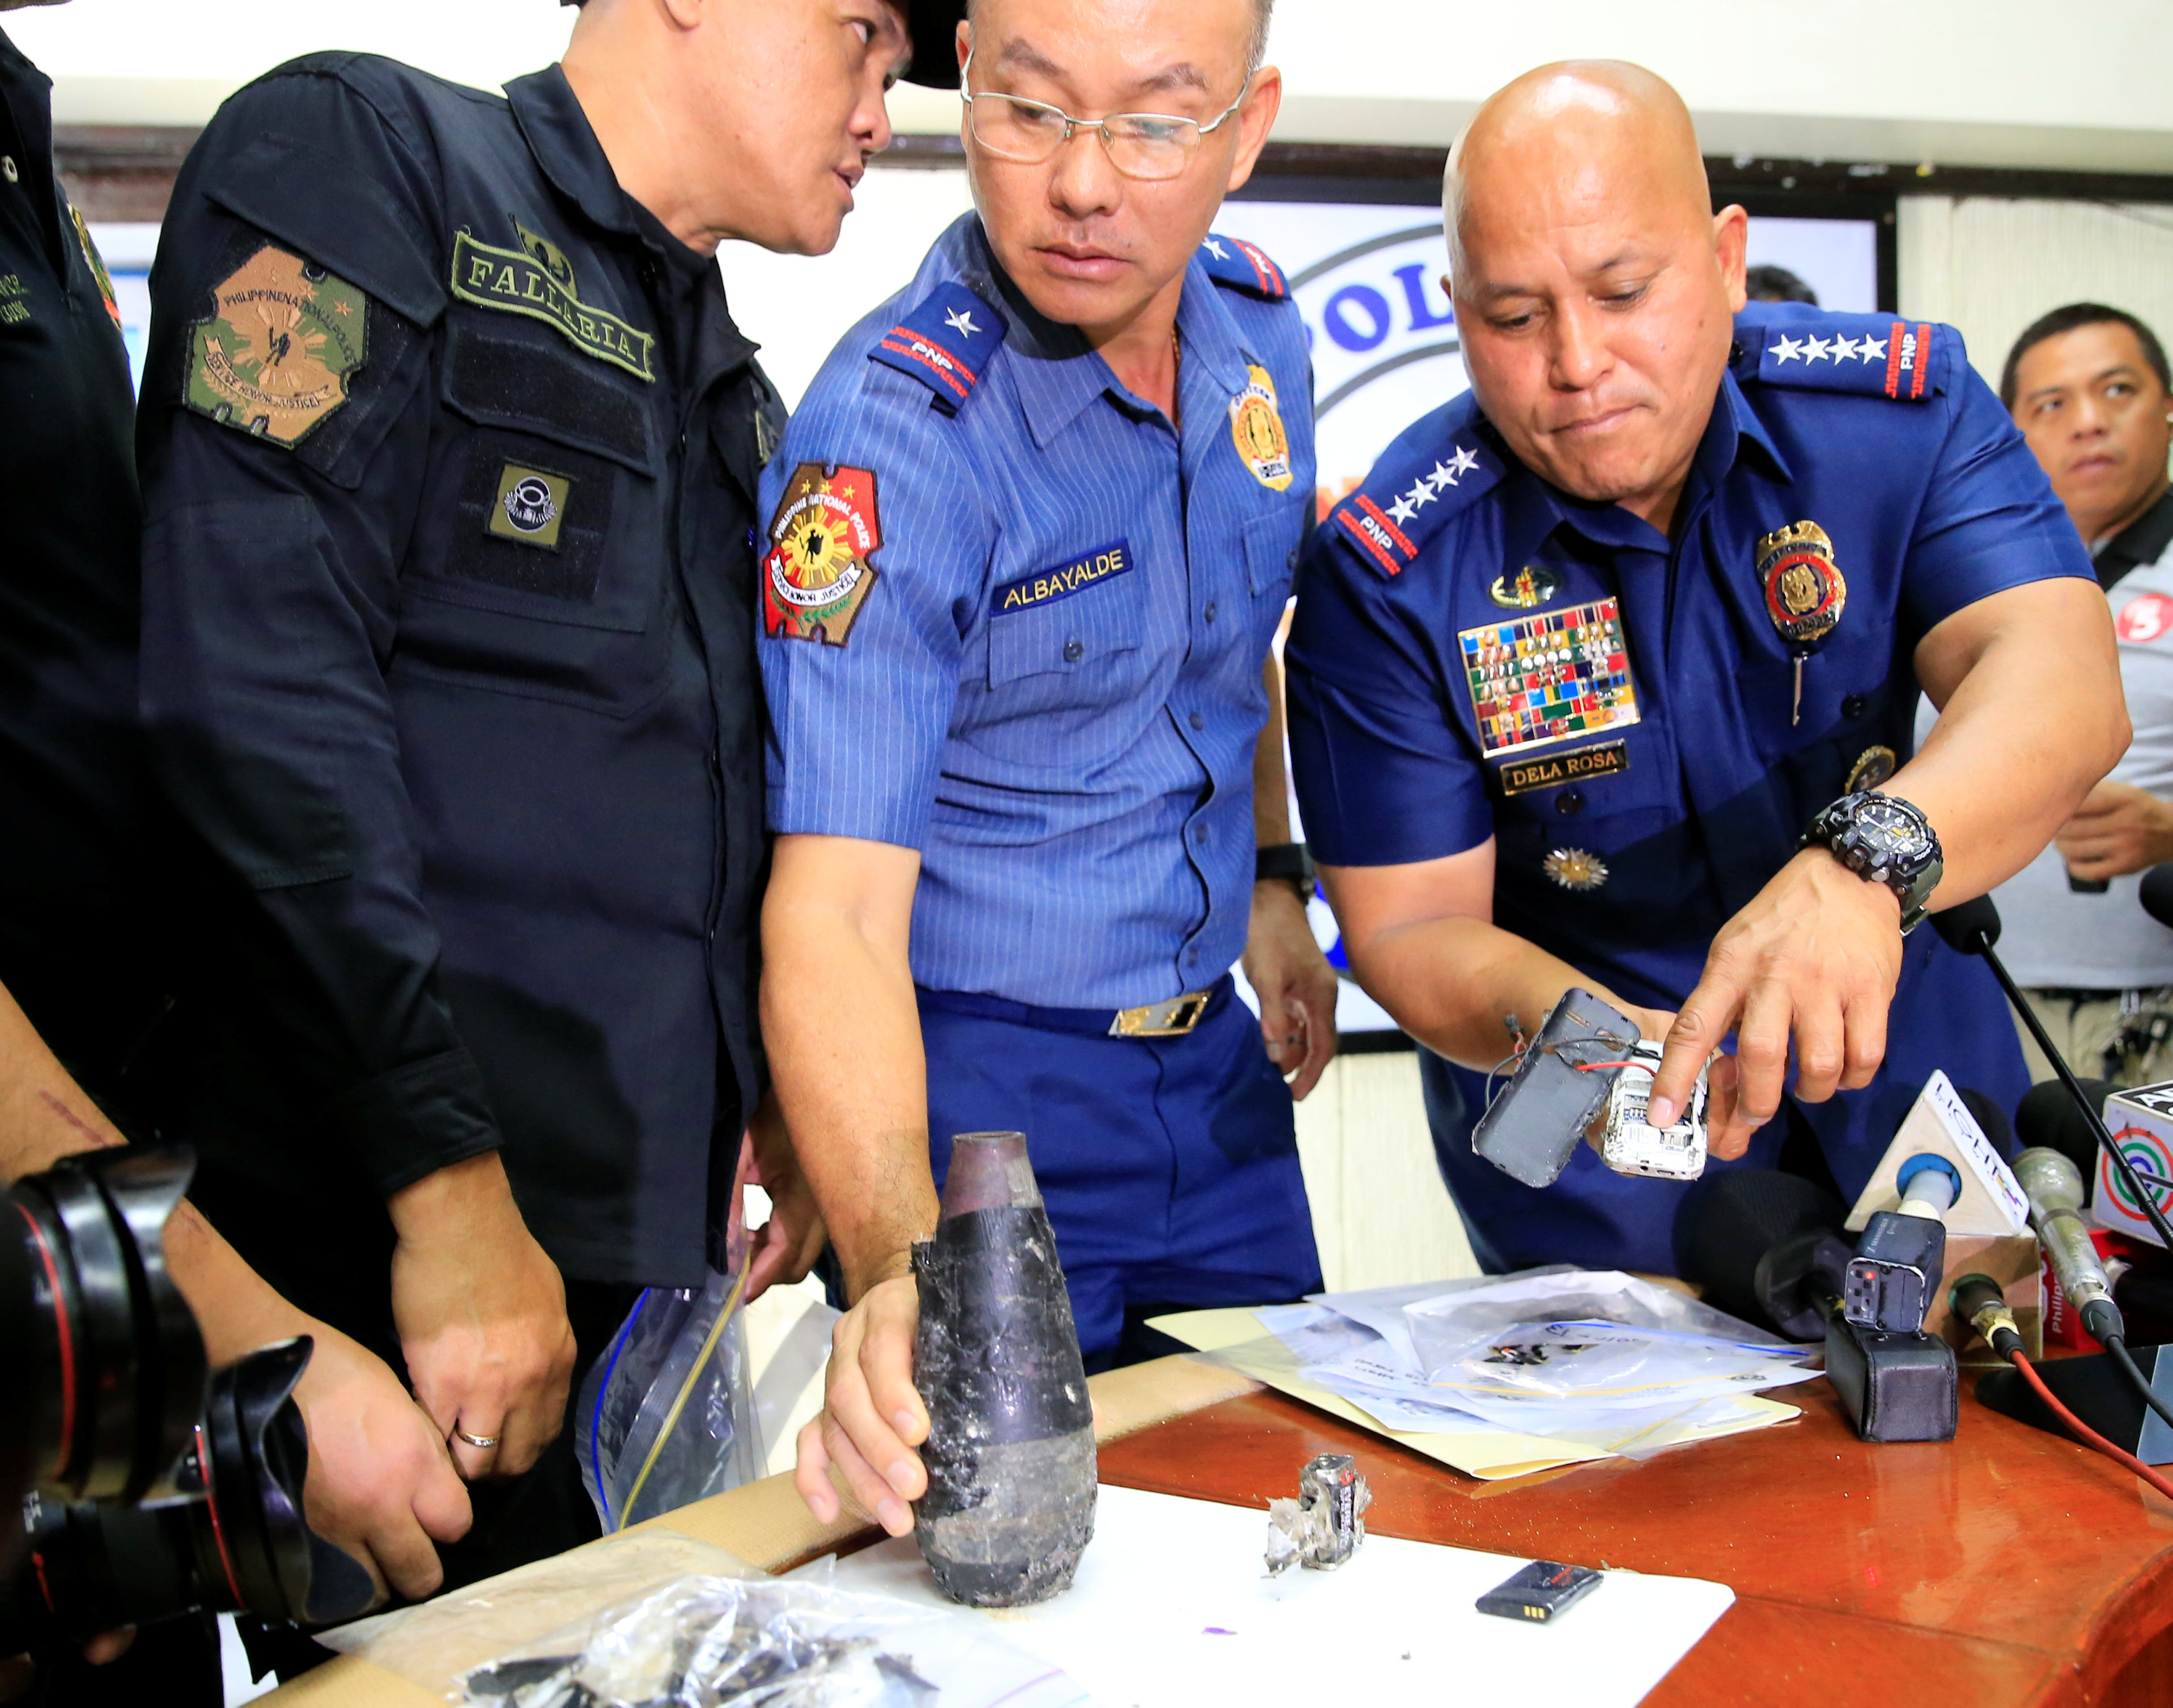 Philippine National Police (PNP) chief Director General Ronald Dela Rosa (R) and National Capital Region Police Office (NCRPO) chief superintendent Oscar Albayalde inspect the Improvised Explosive Device (IED) found near the U.S Embassy during a press con